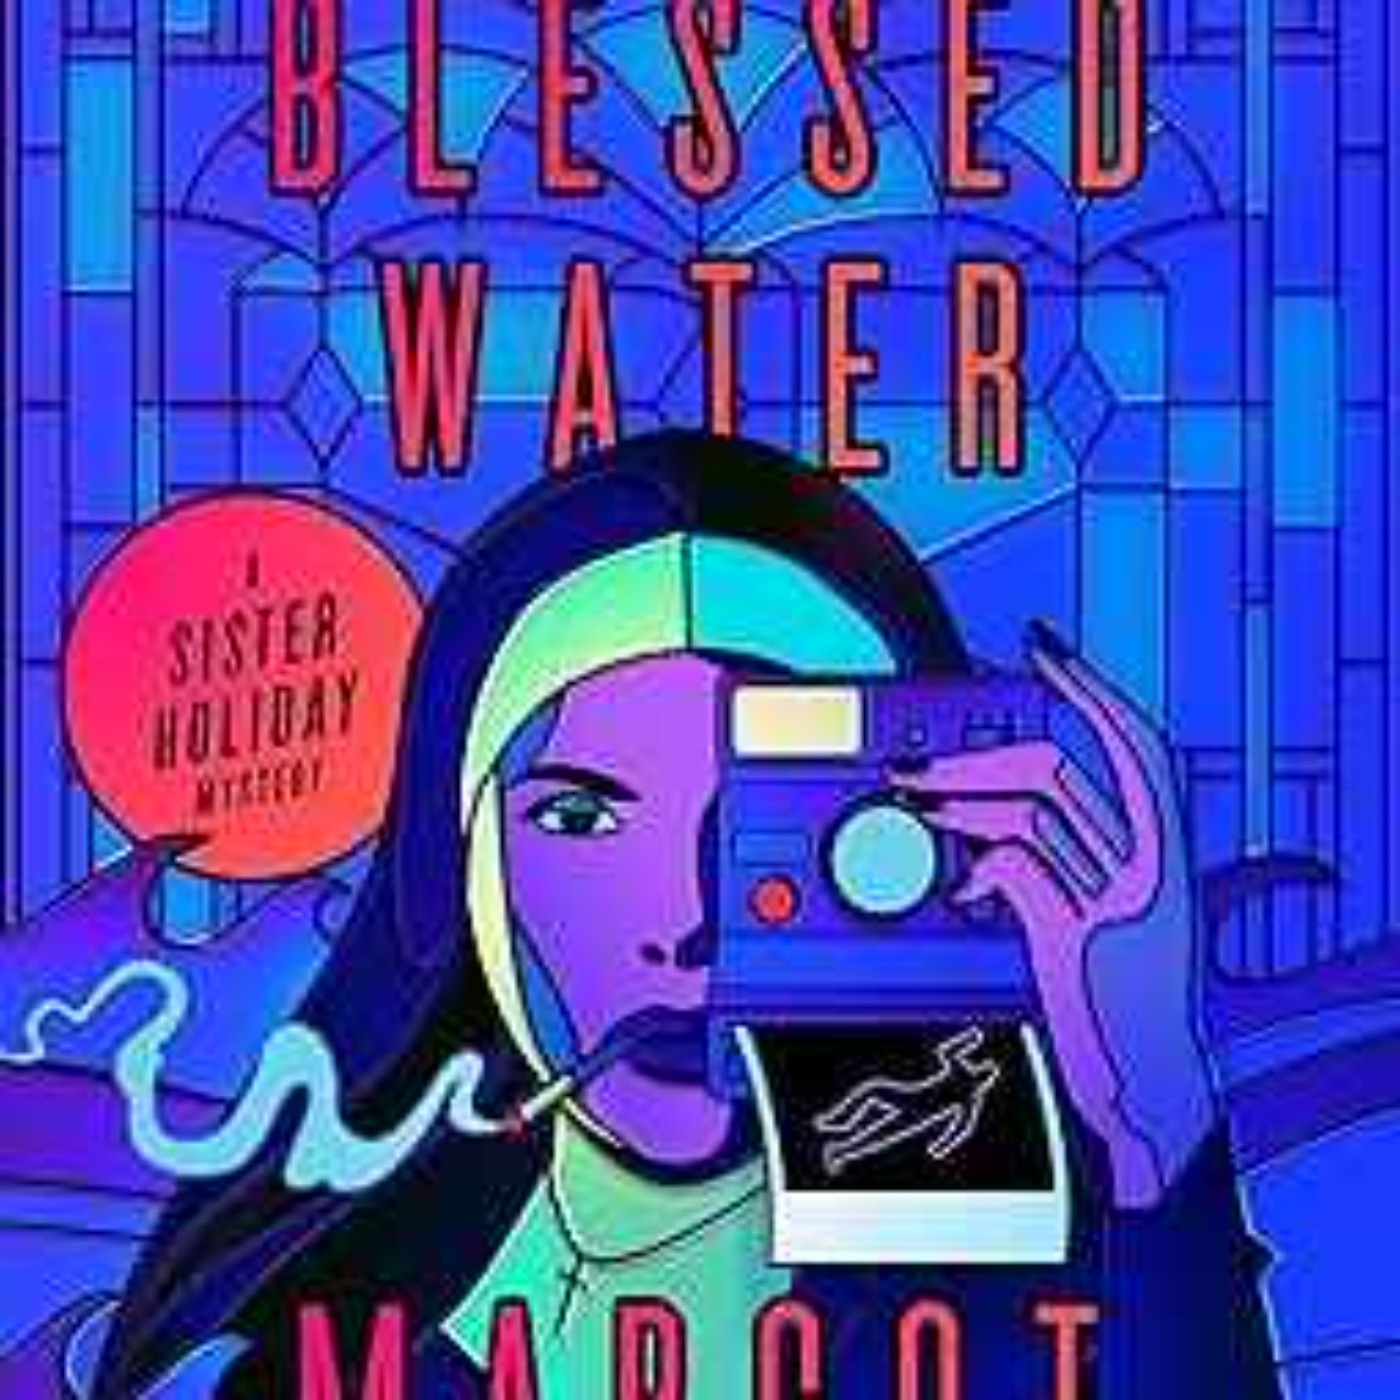 Margot Douaihy - Blessed Water: A Sister Holiday Mystery